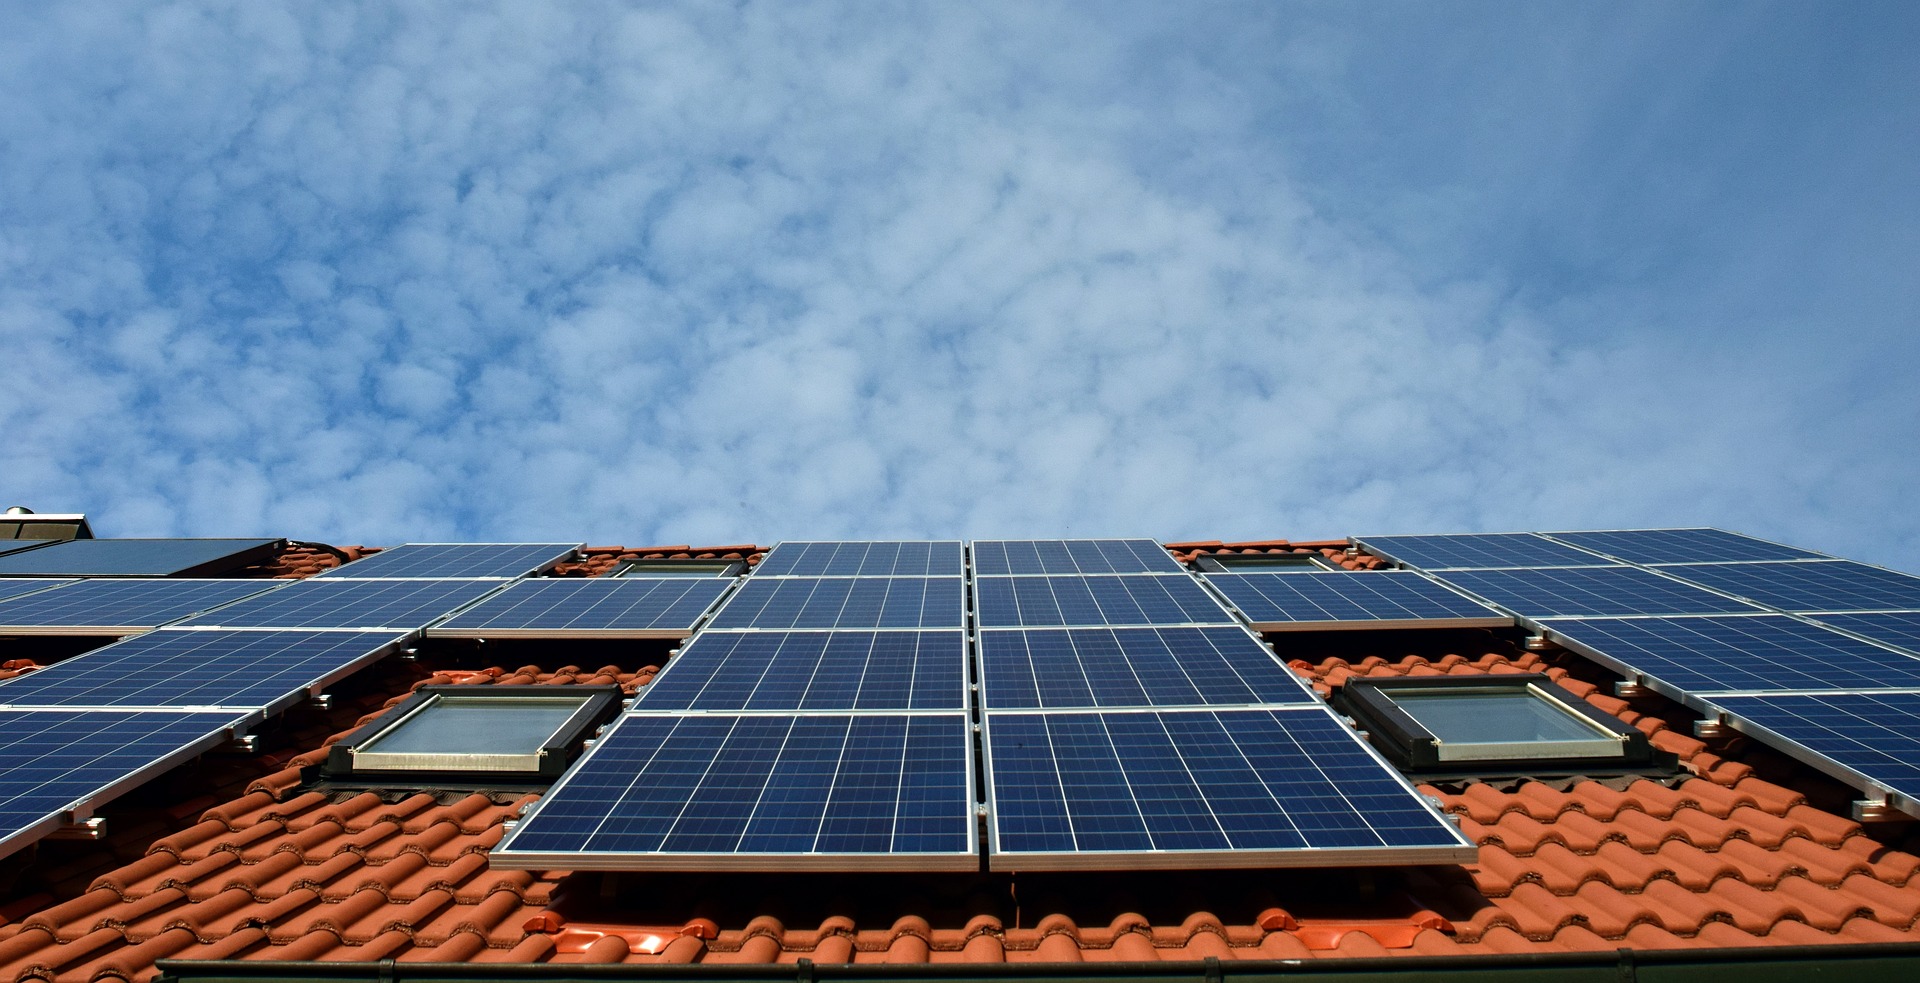 Solar panels on the roof of a house; our Conveyancing Solicitors in Preston discuss six things to consider when buying property with solar panels.